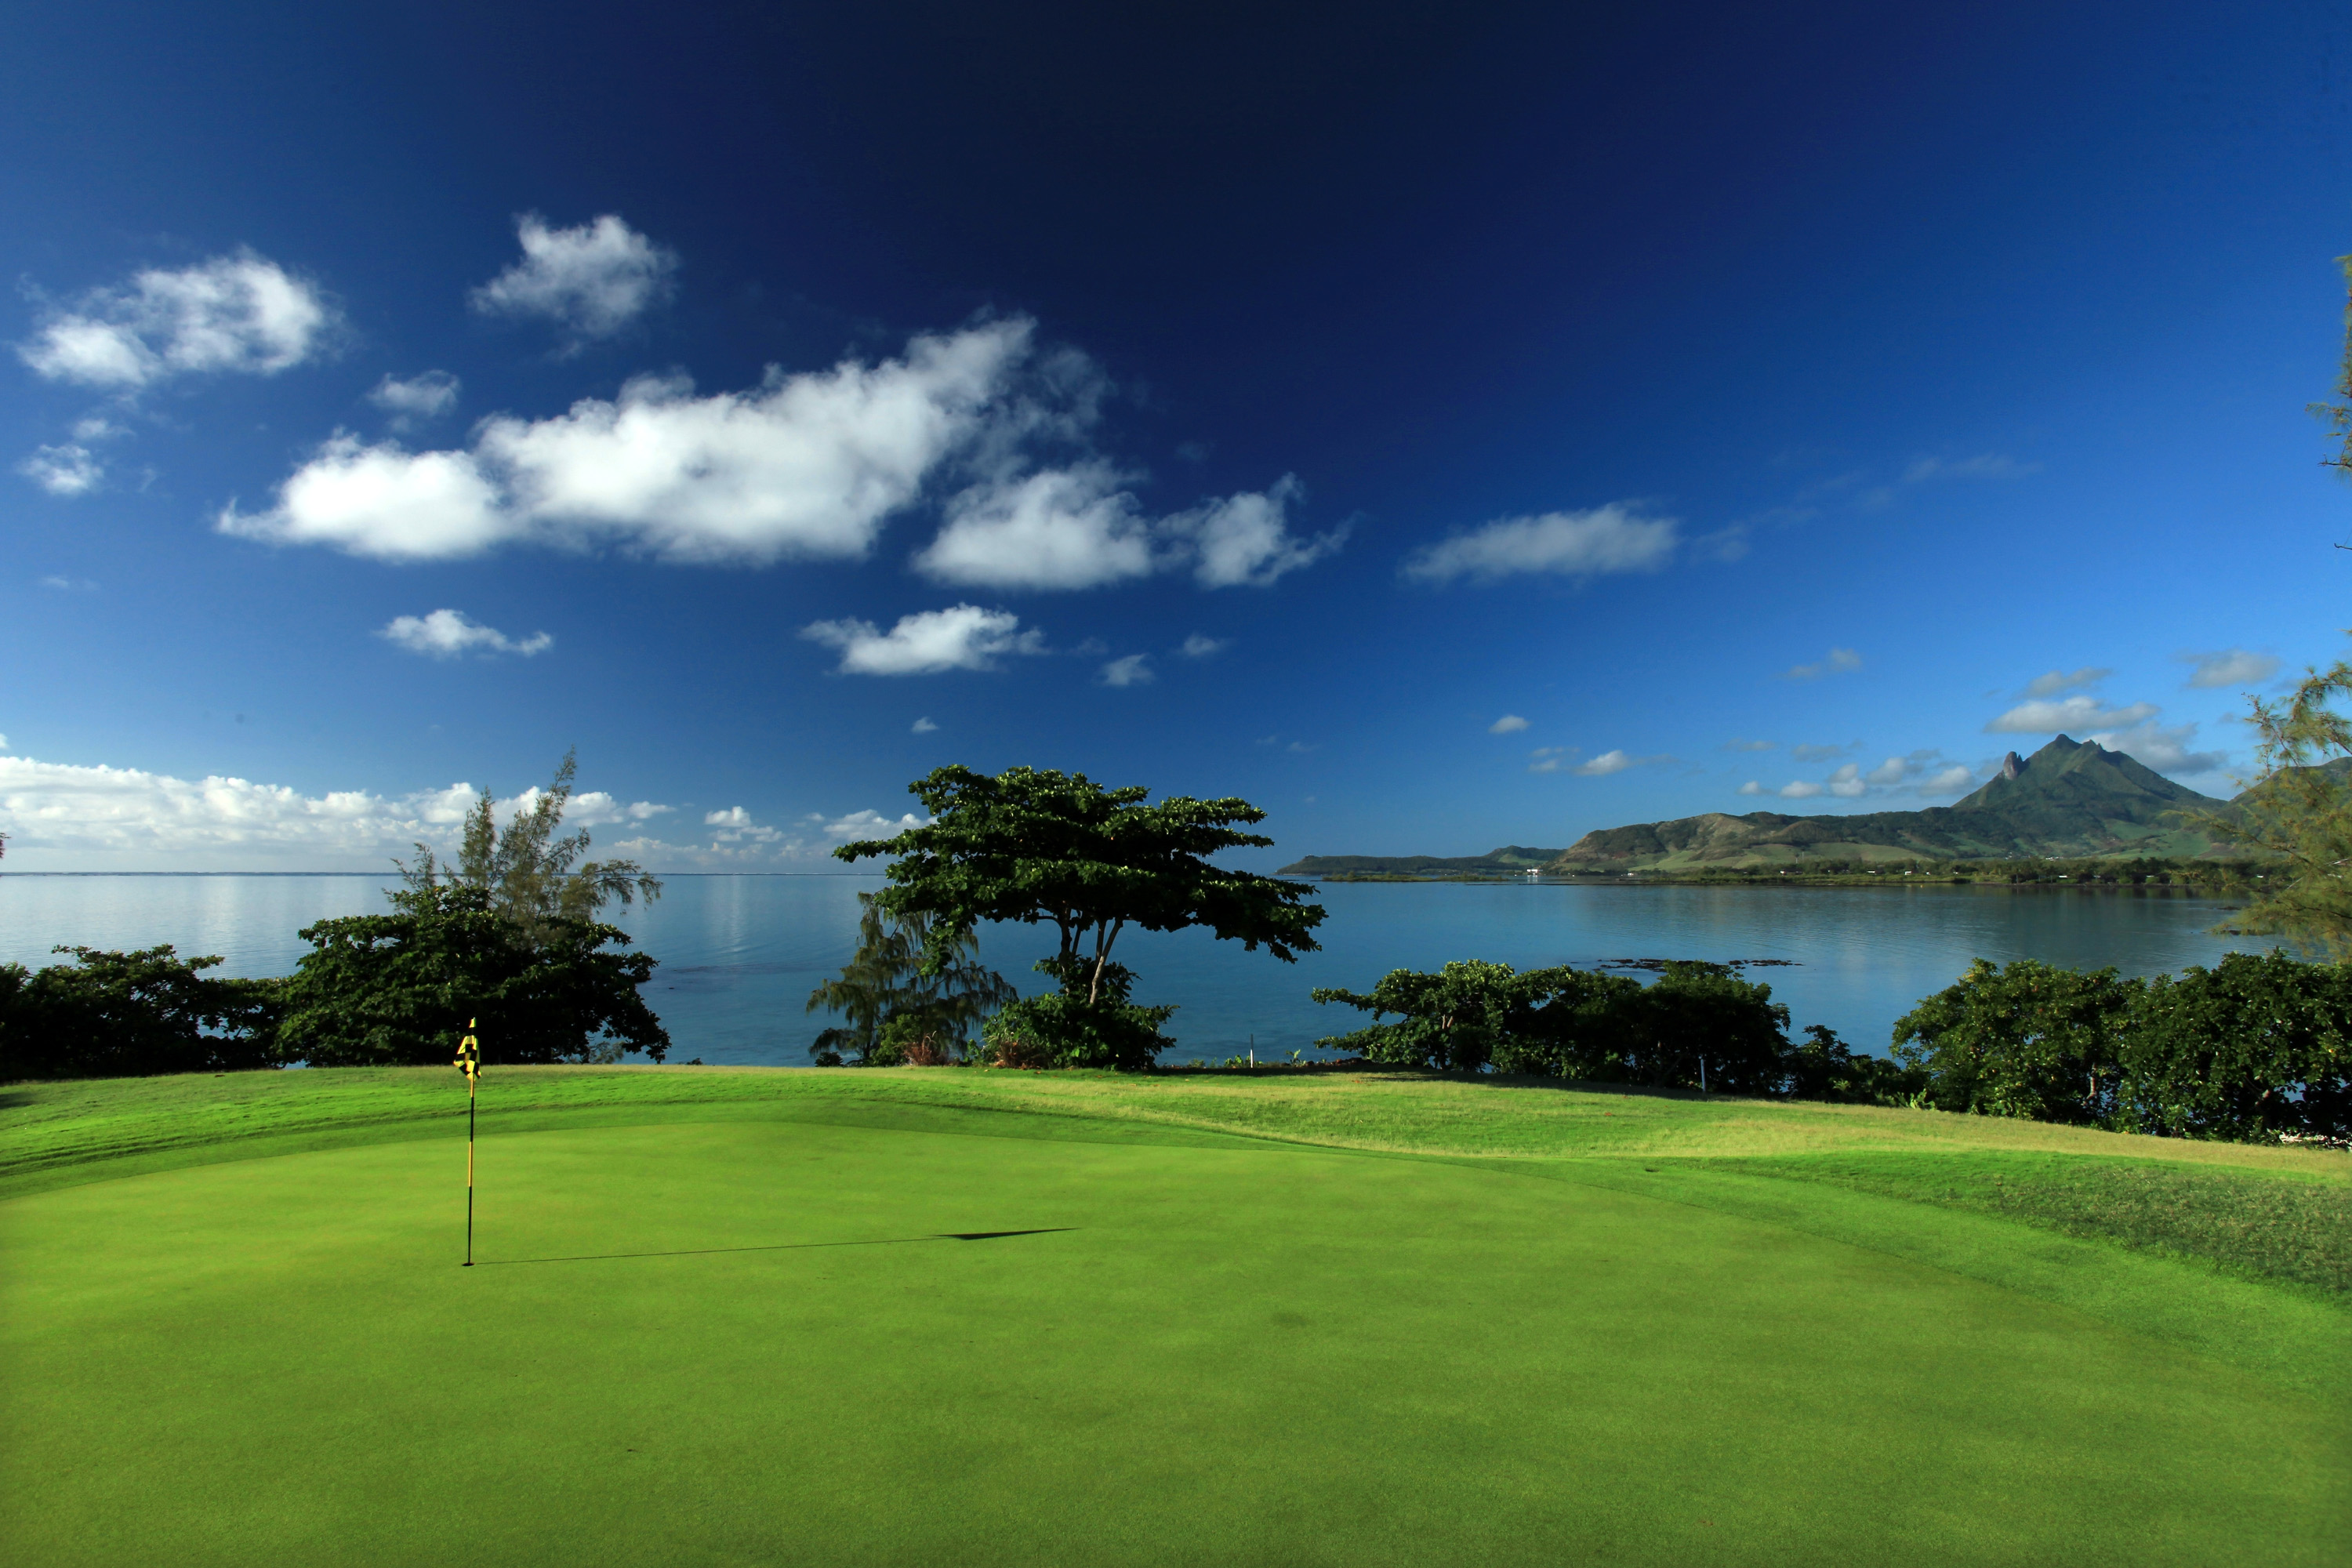 Mauritius offers a picture-perfect backdrop for golf (Photo: Getty Images)